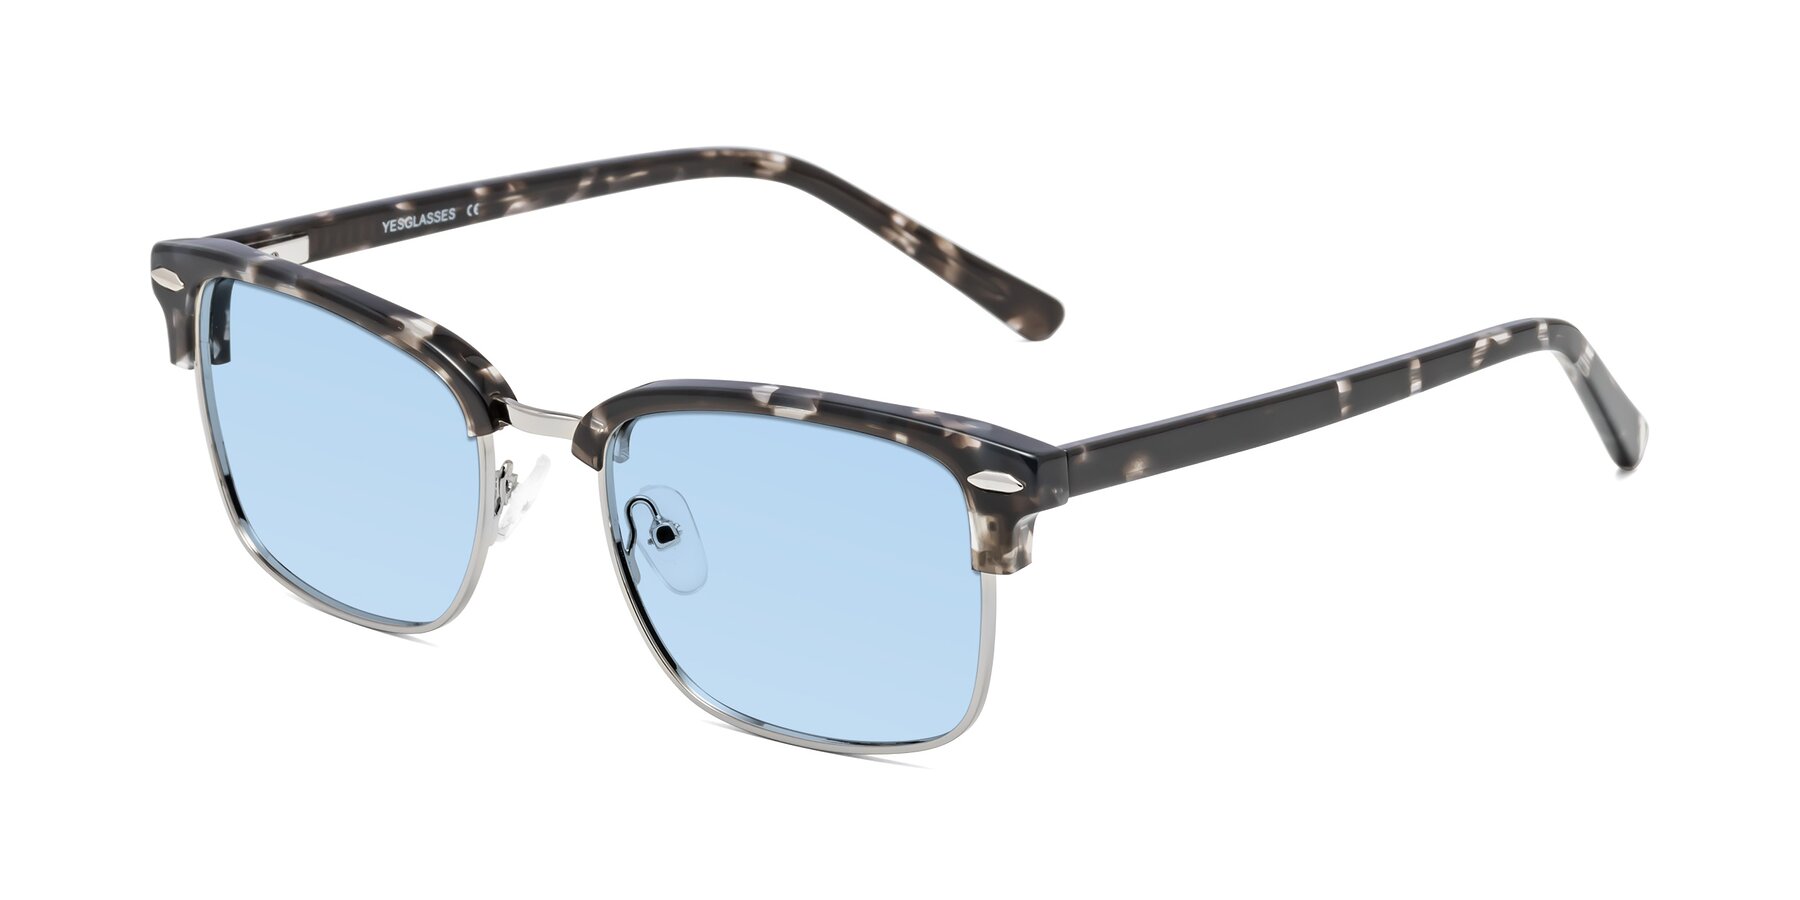 Angle of 17464 in Tortoise-Silver with Light Blue Tinted Lenses